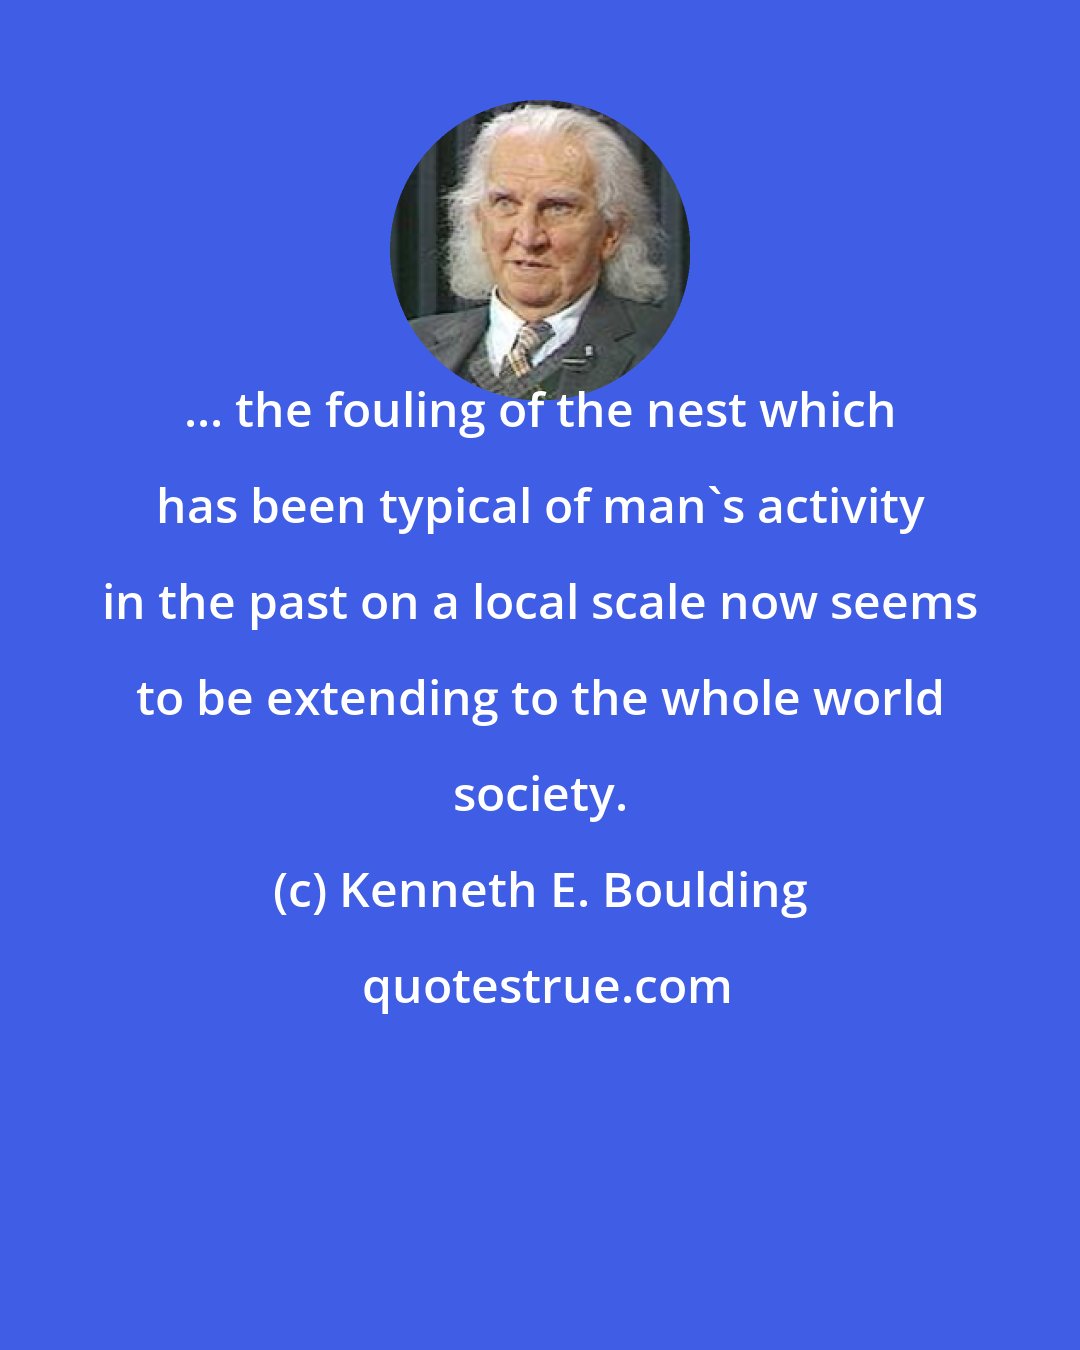 Kenneth E. Boulding: ... the fouling of the nest which has been typical of man's activity in the past on a local scale now seems to be extending to the whole world society.